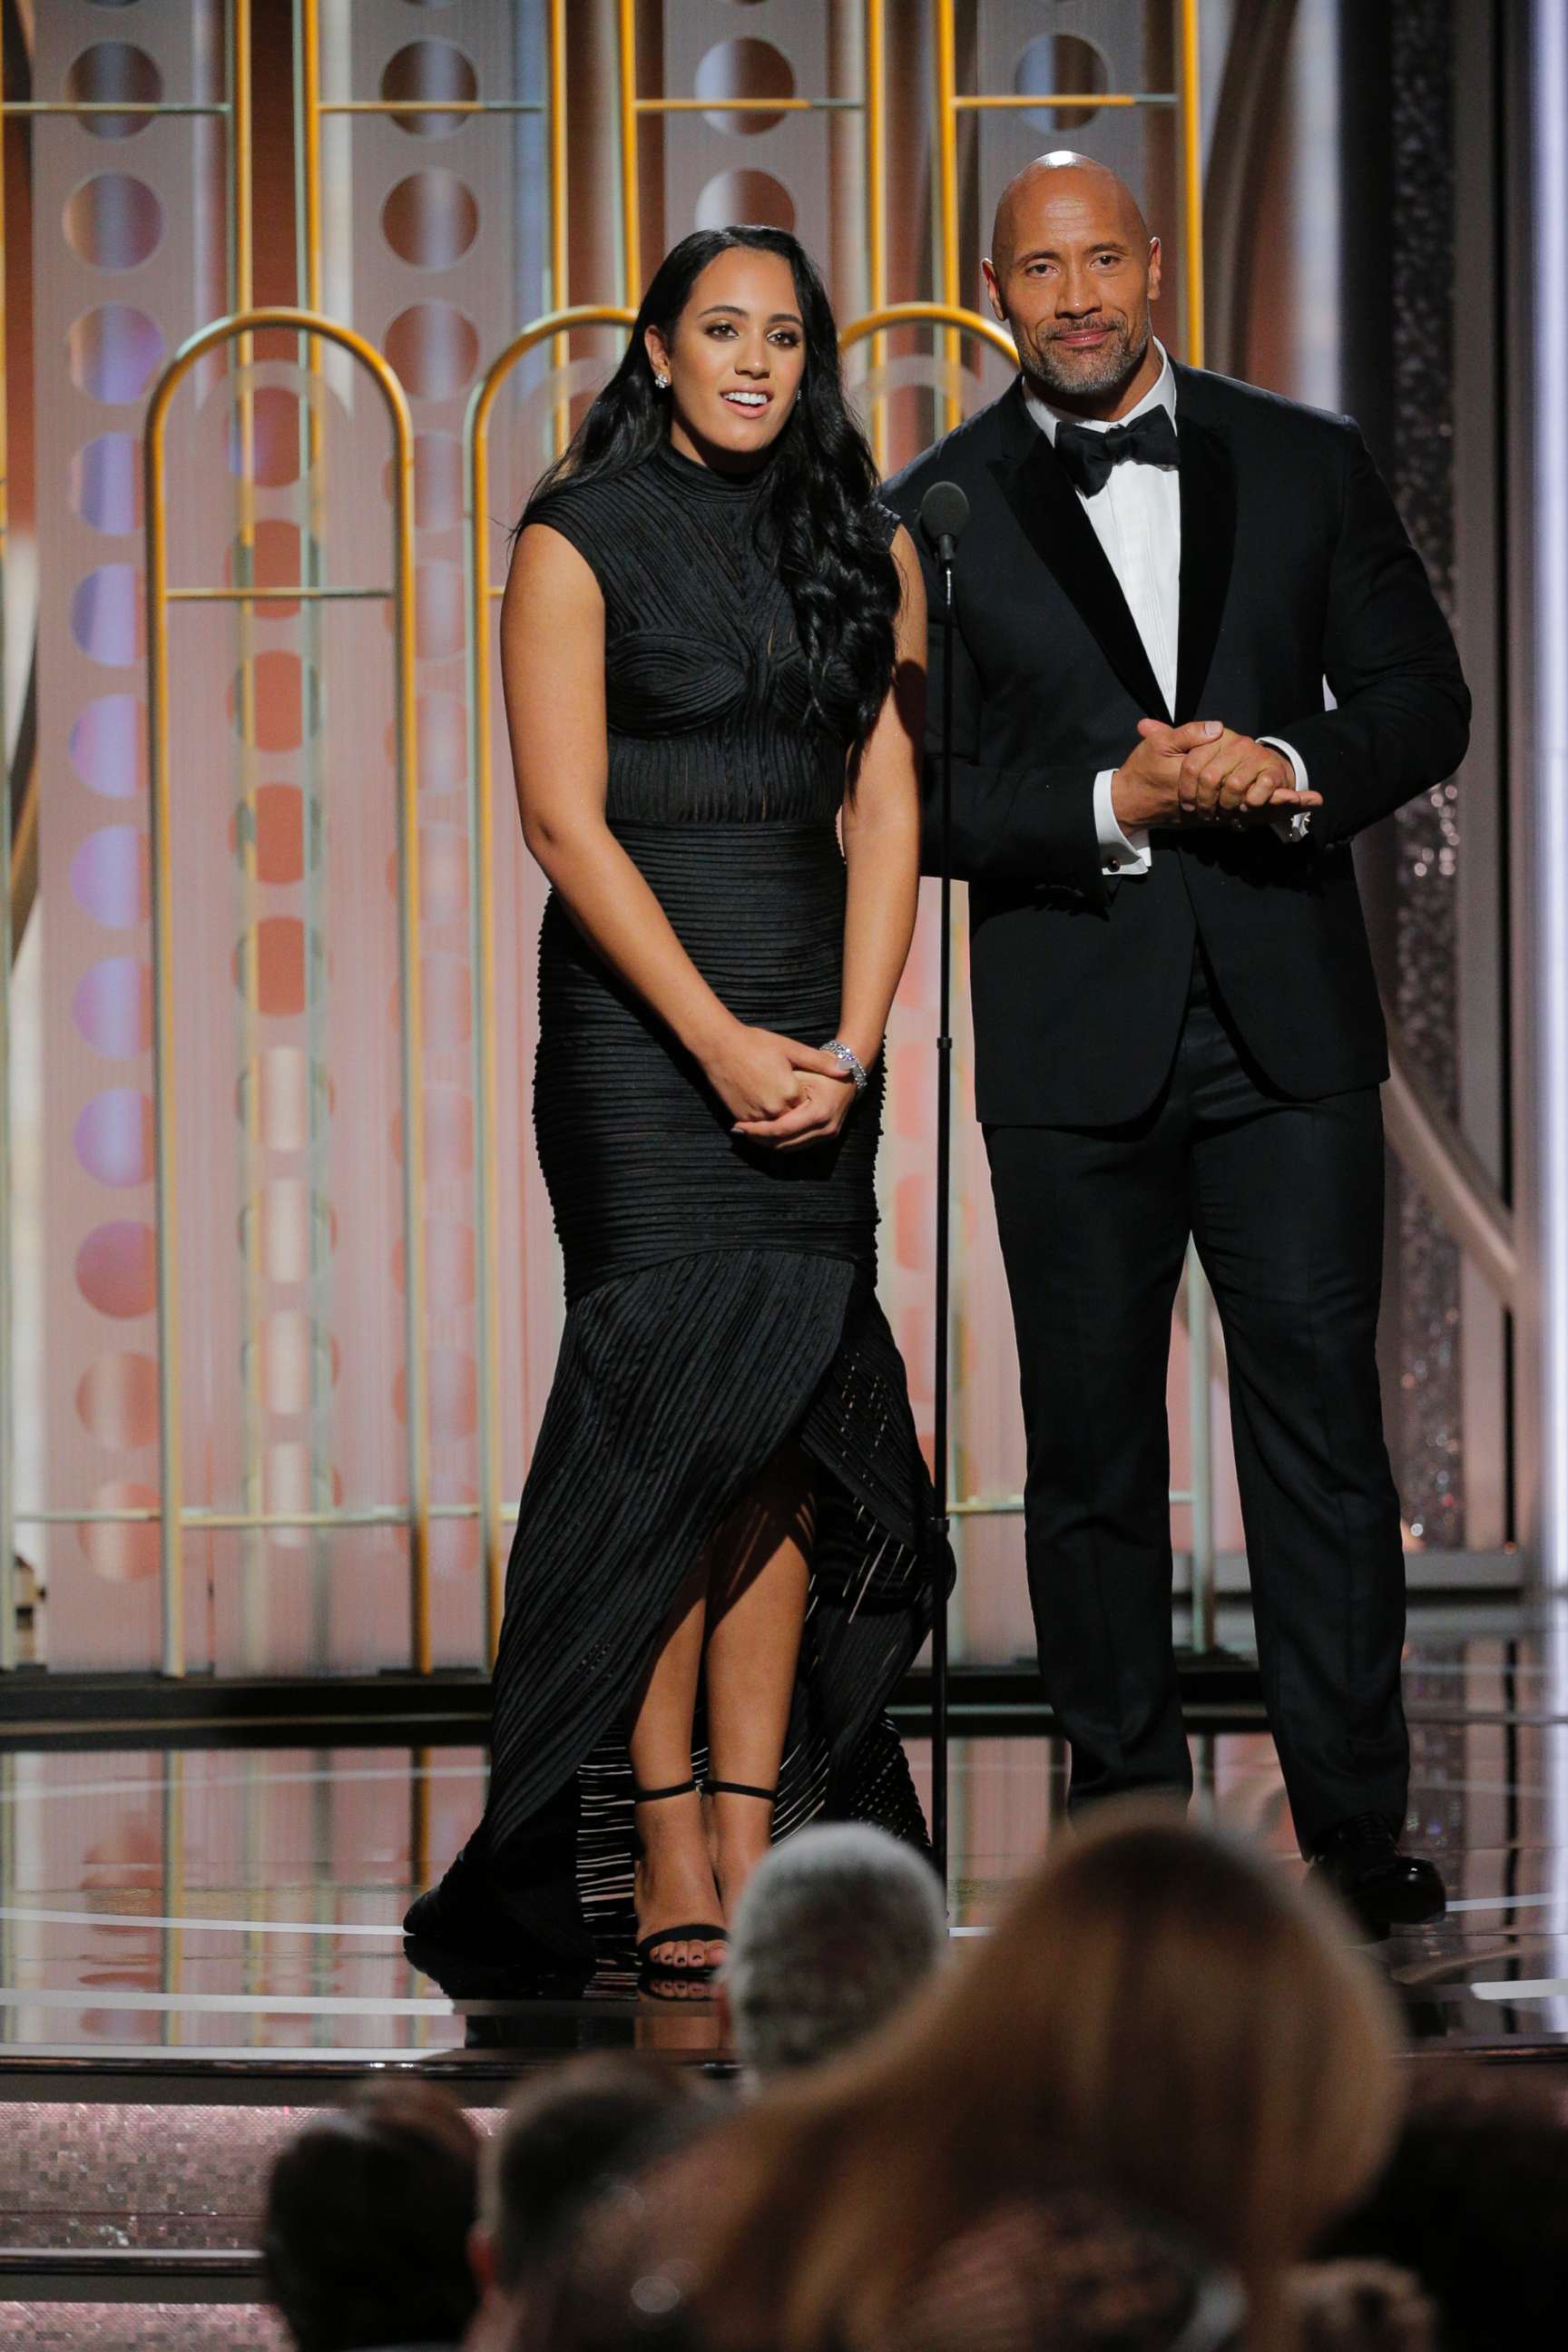 PHOTO: Golden Globe Ambassador Simone Garcia Johnson and her father Dwayne Johnson speak onstage during the 75th Annual Golden Globe Awards on Jan. 7, 2018 in Beverly Hills, Calif.